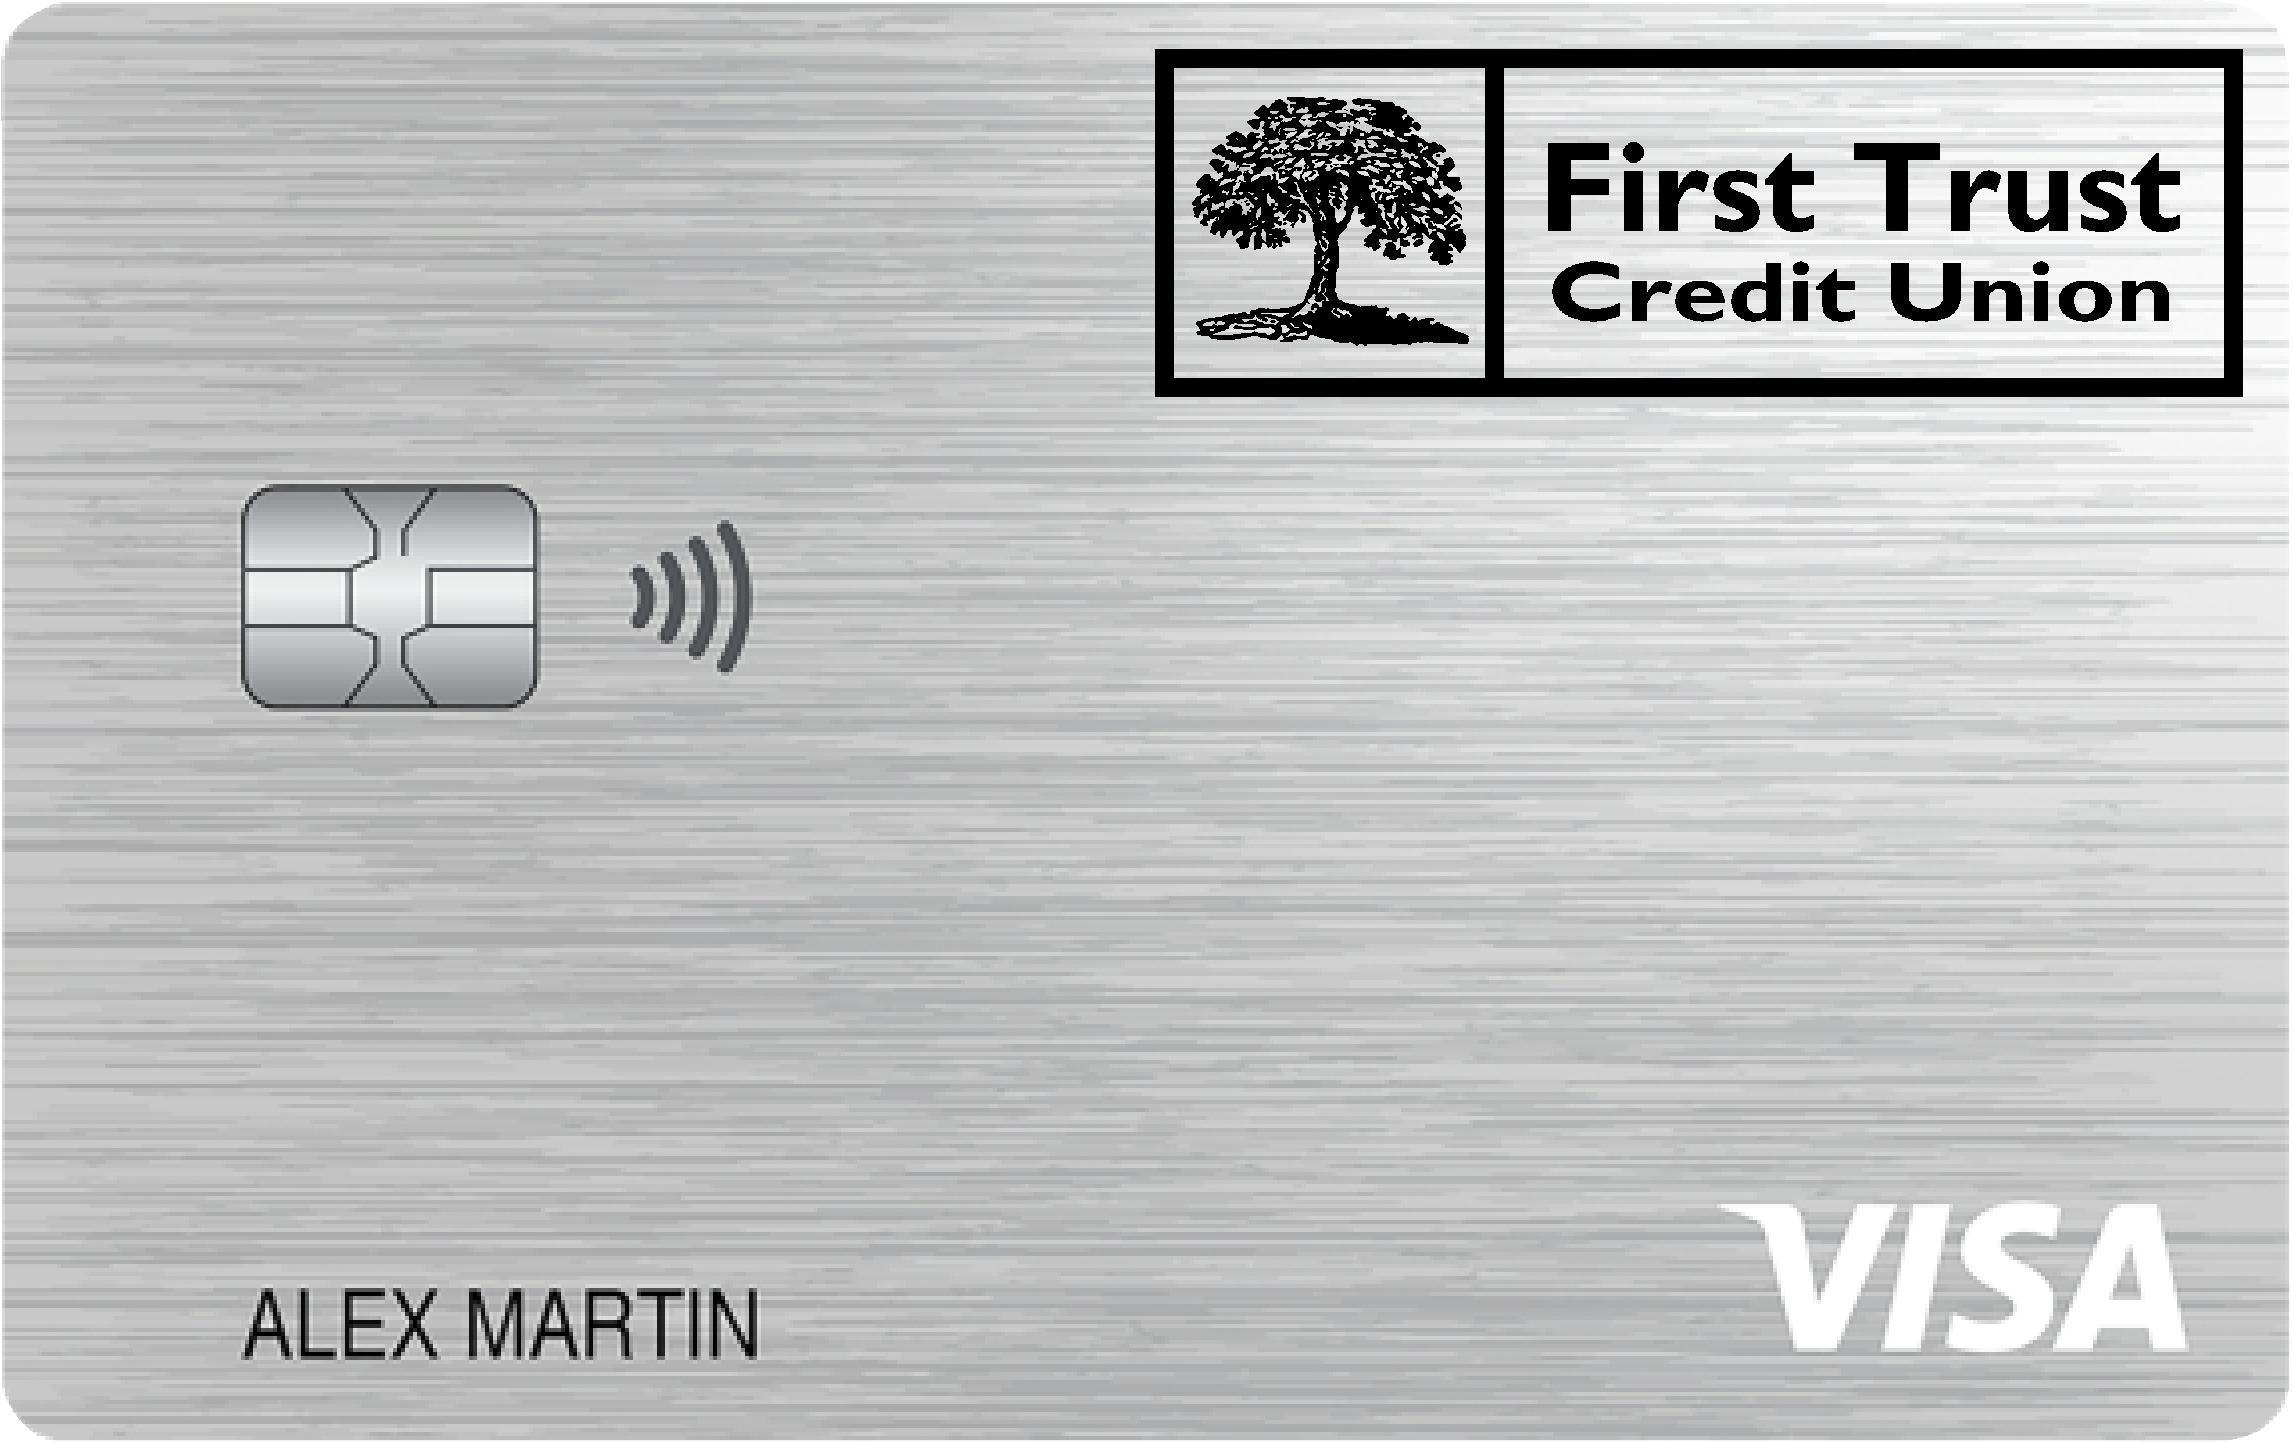 First Trust Credit Union